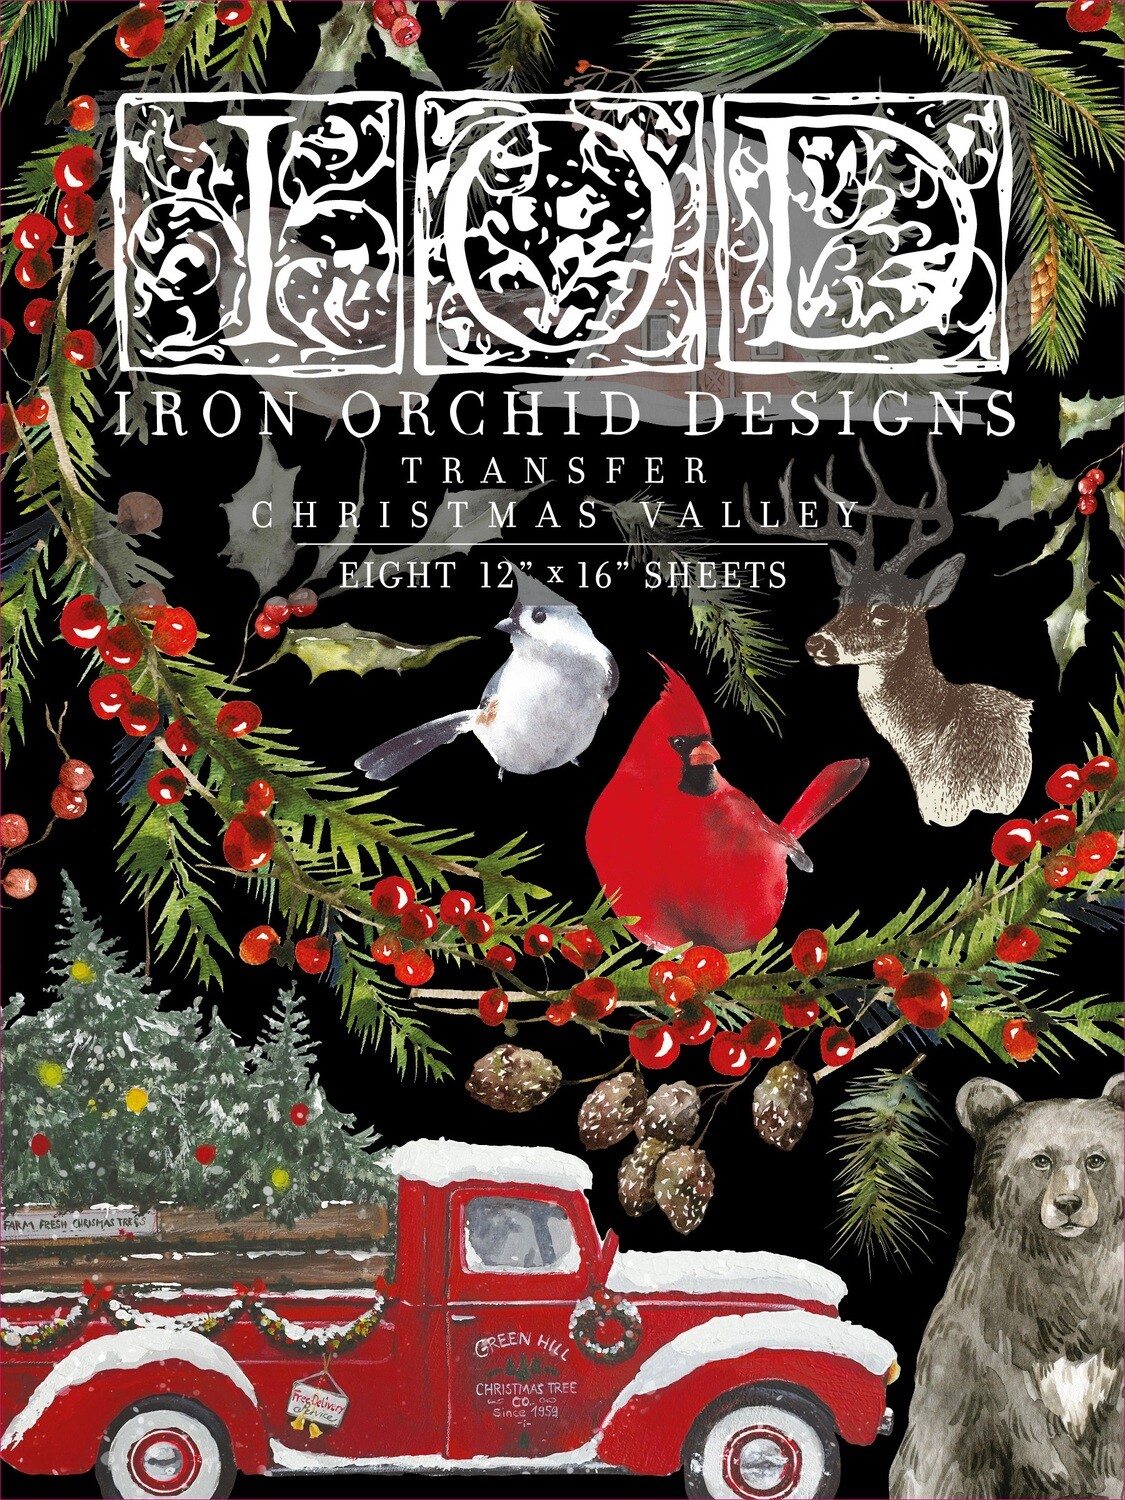 IOD CHRISTMAS VALLEY DECOR TRANSFER - Iron Orchid Designs